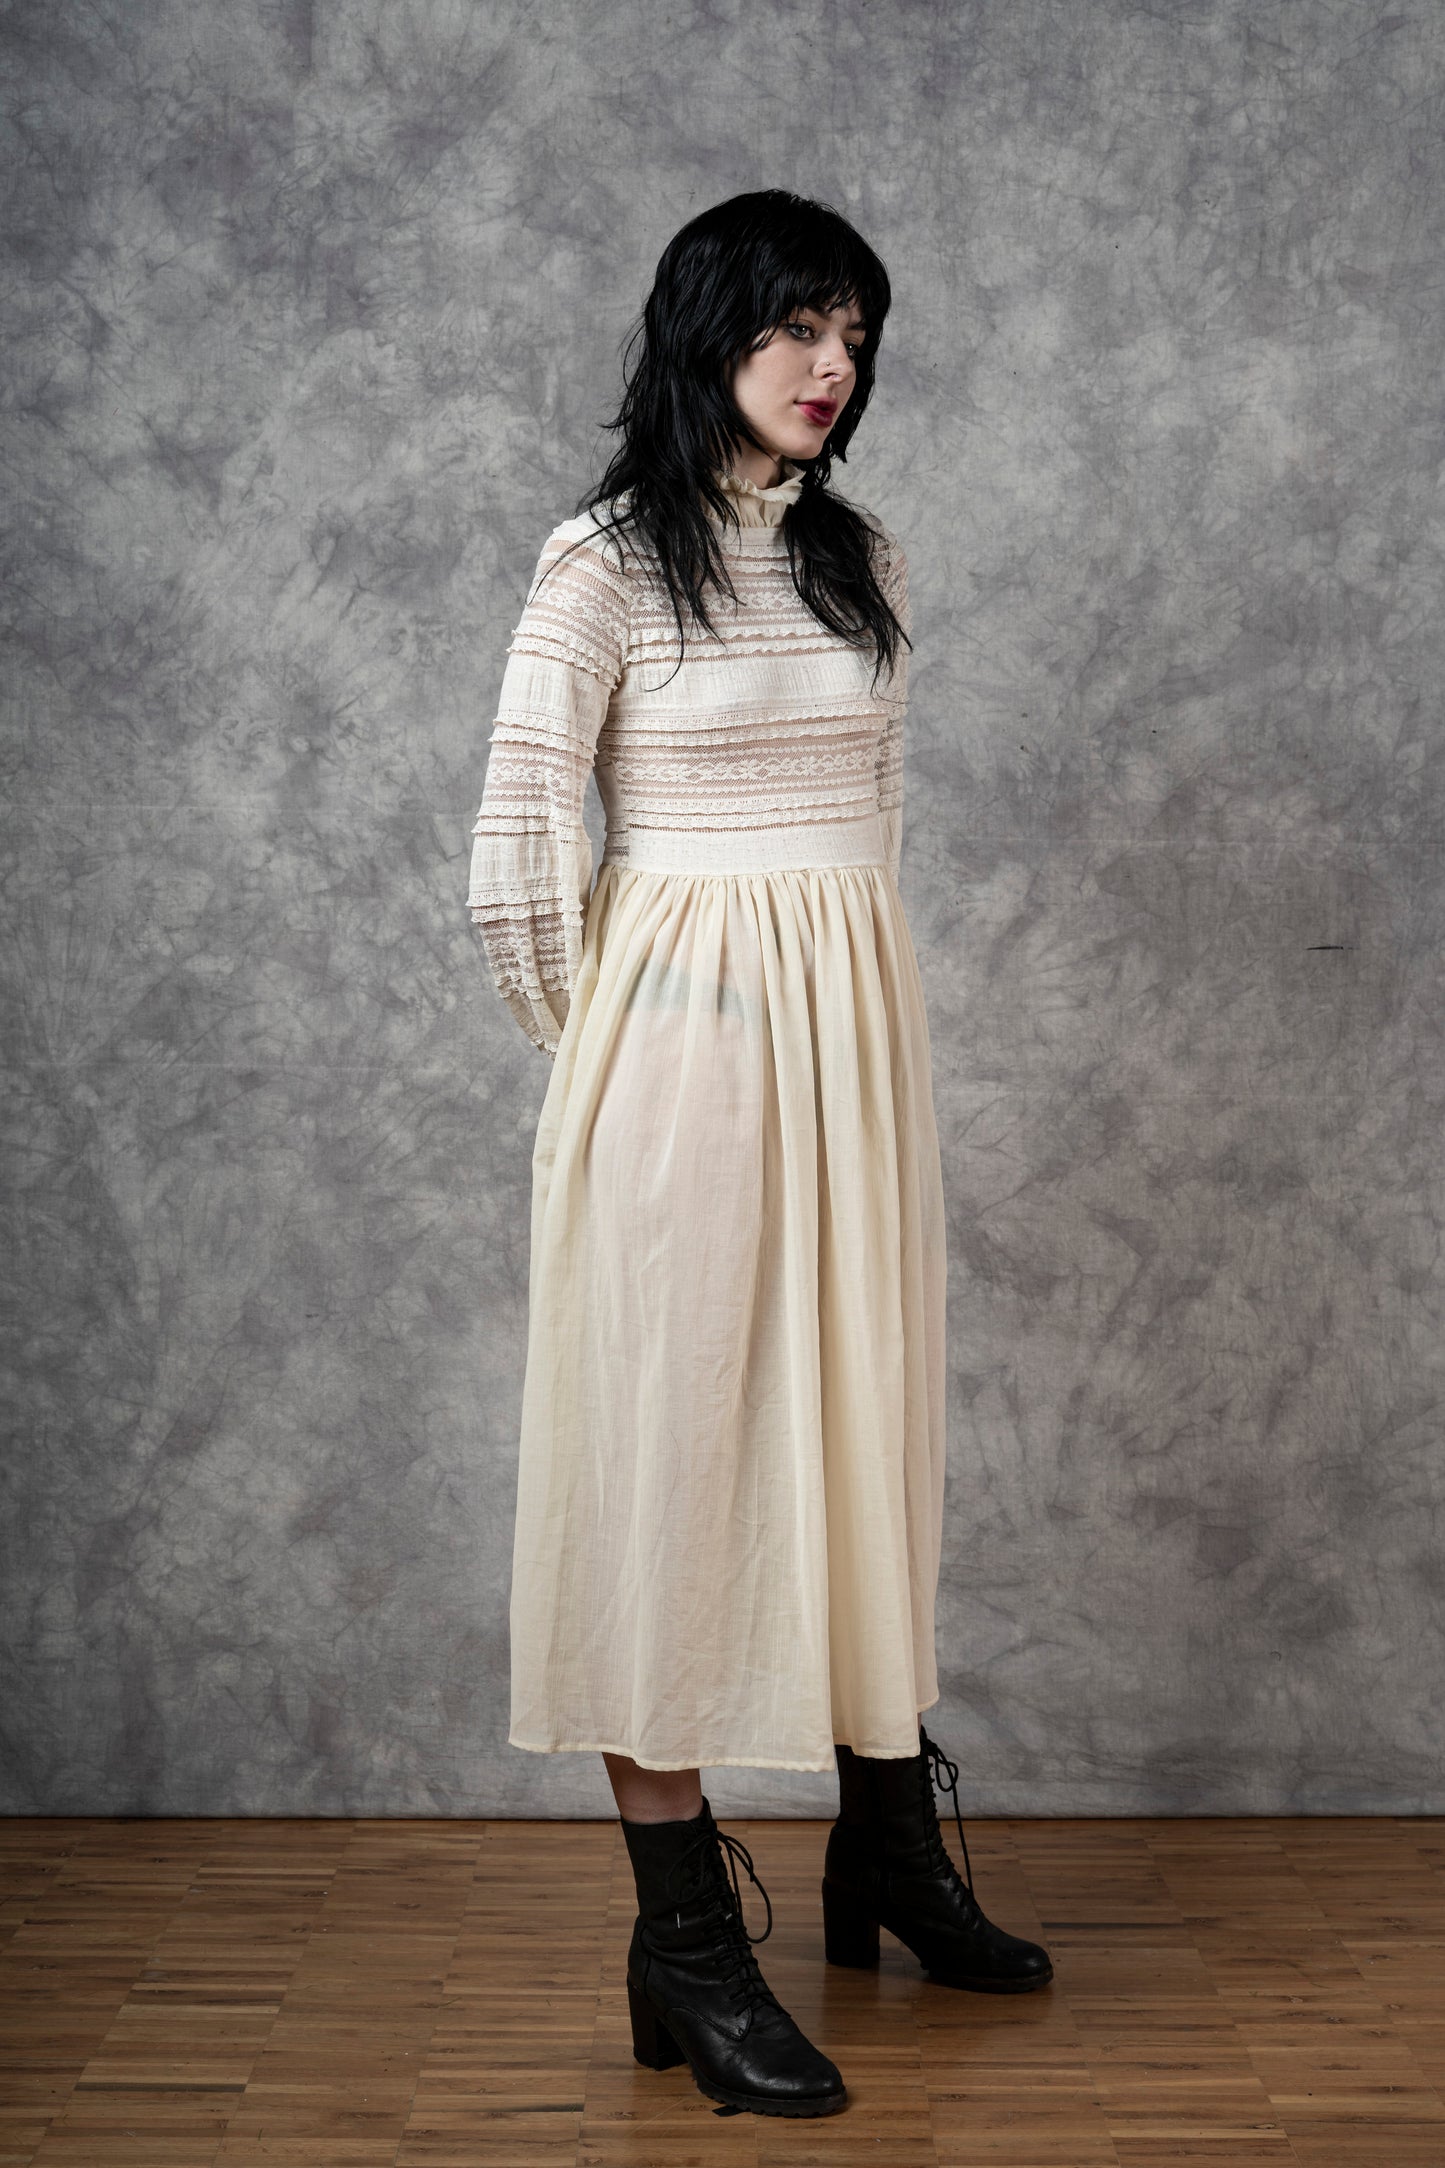 "Edith" Lace High Collar Dress in Ivory